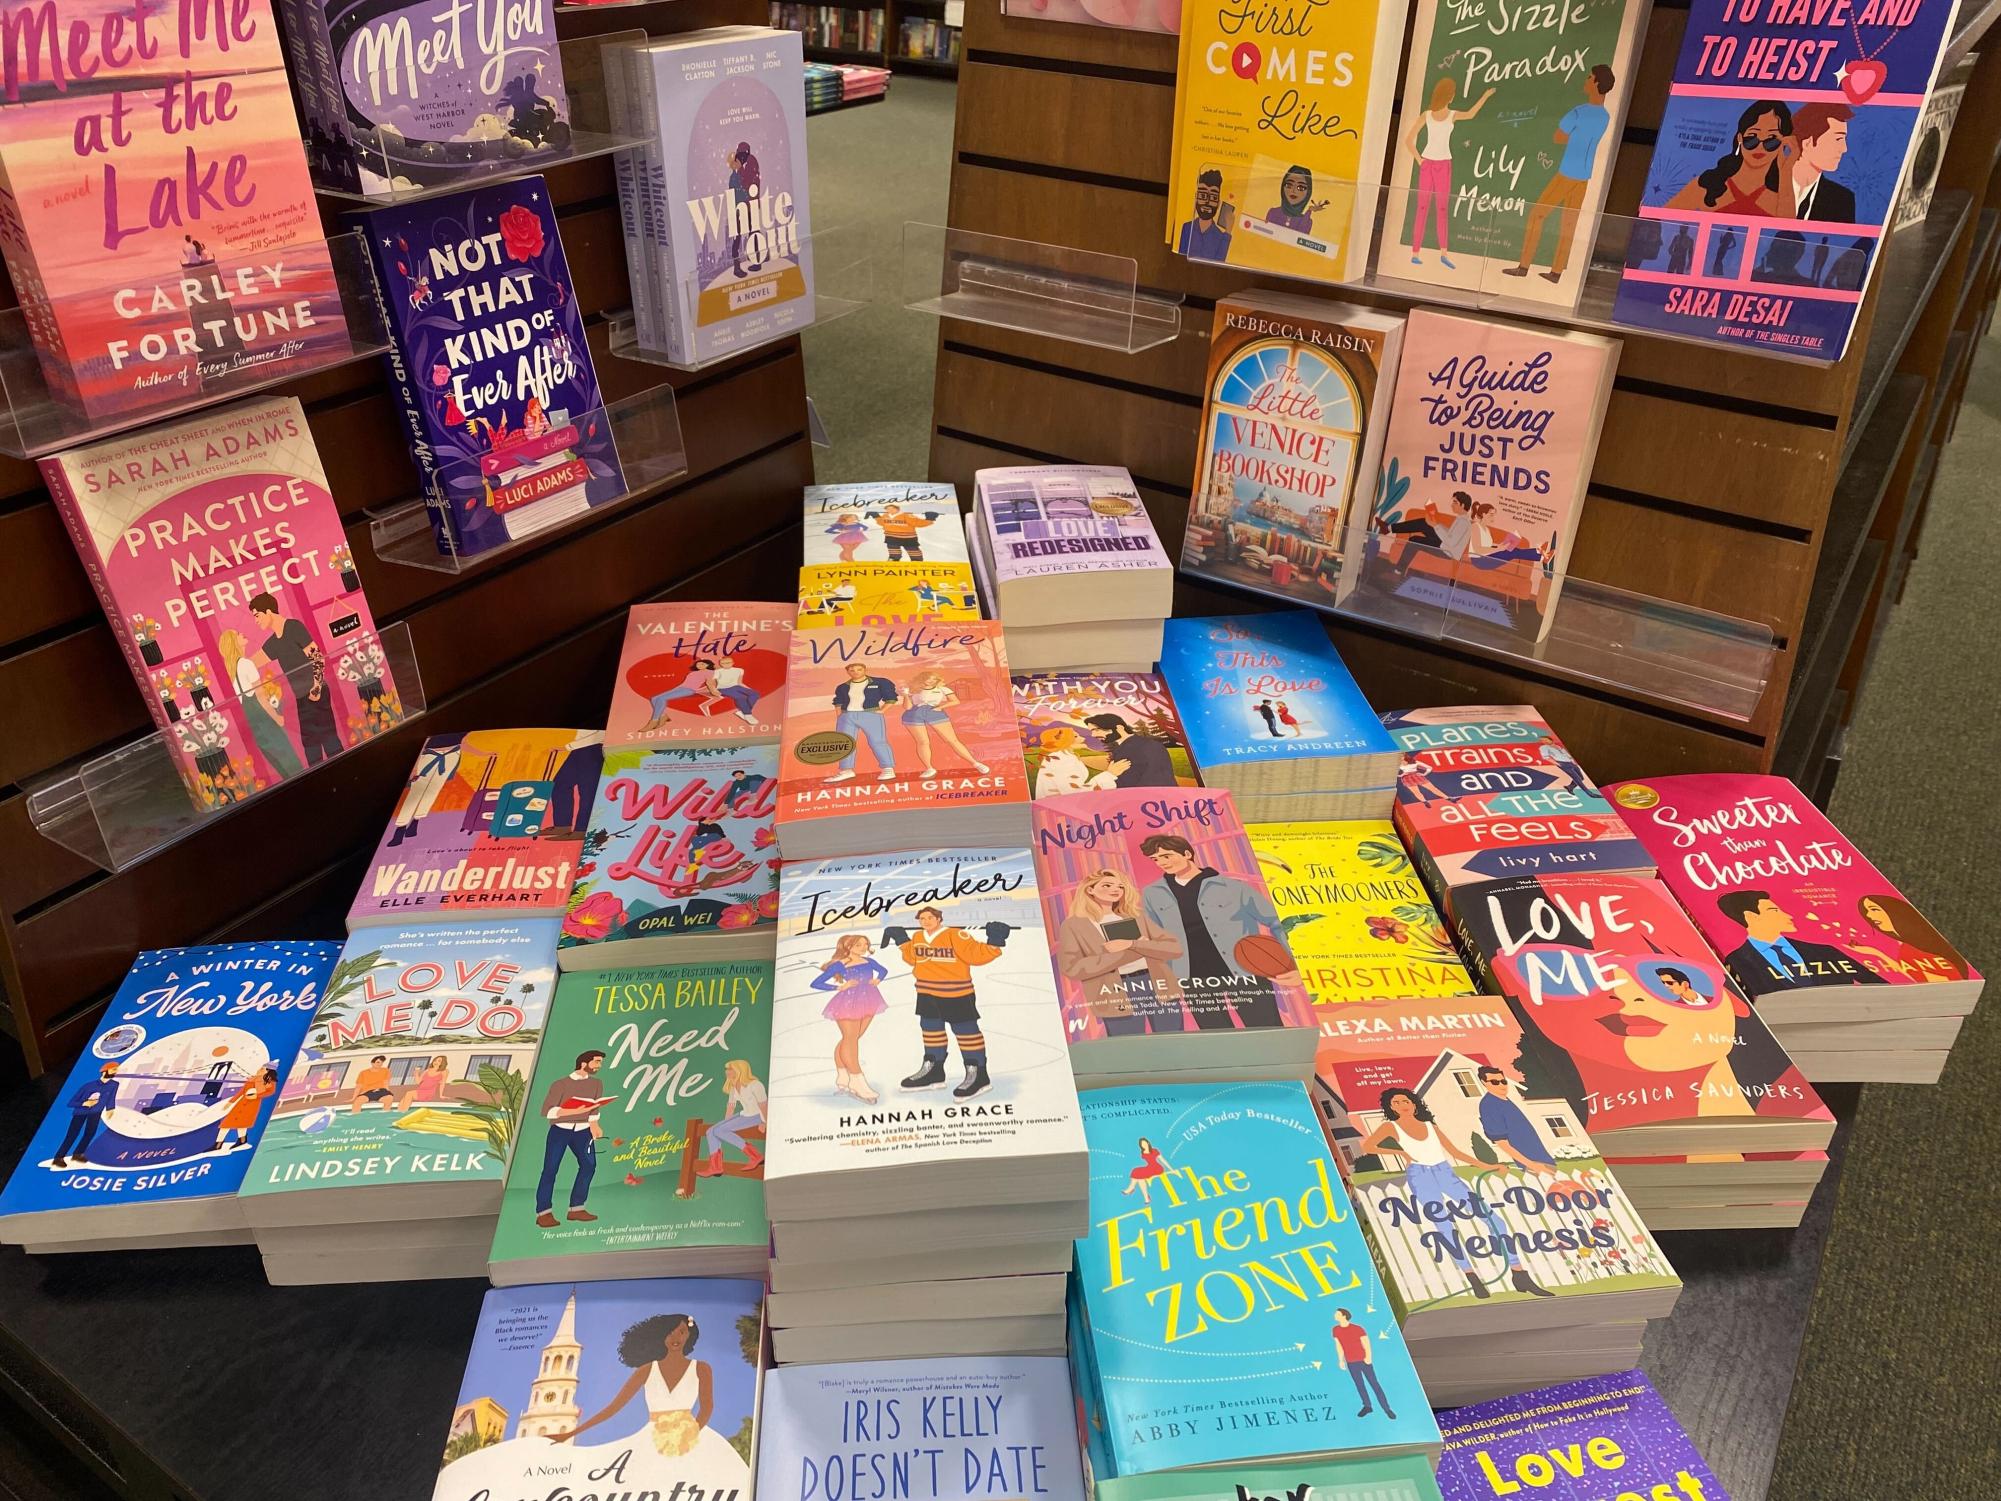 Stacks of romance books with cartoon covers are displayed at the Peoria Barnes and Nobel location. Books with smut should not be marketed toward minors. (Angelina Padilla-Tompkins | Northern Star)